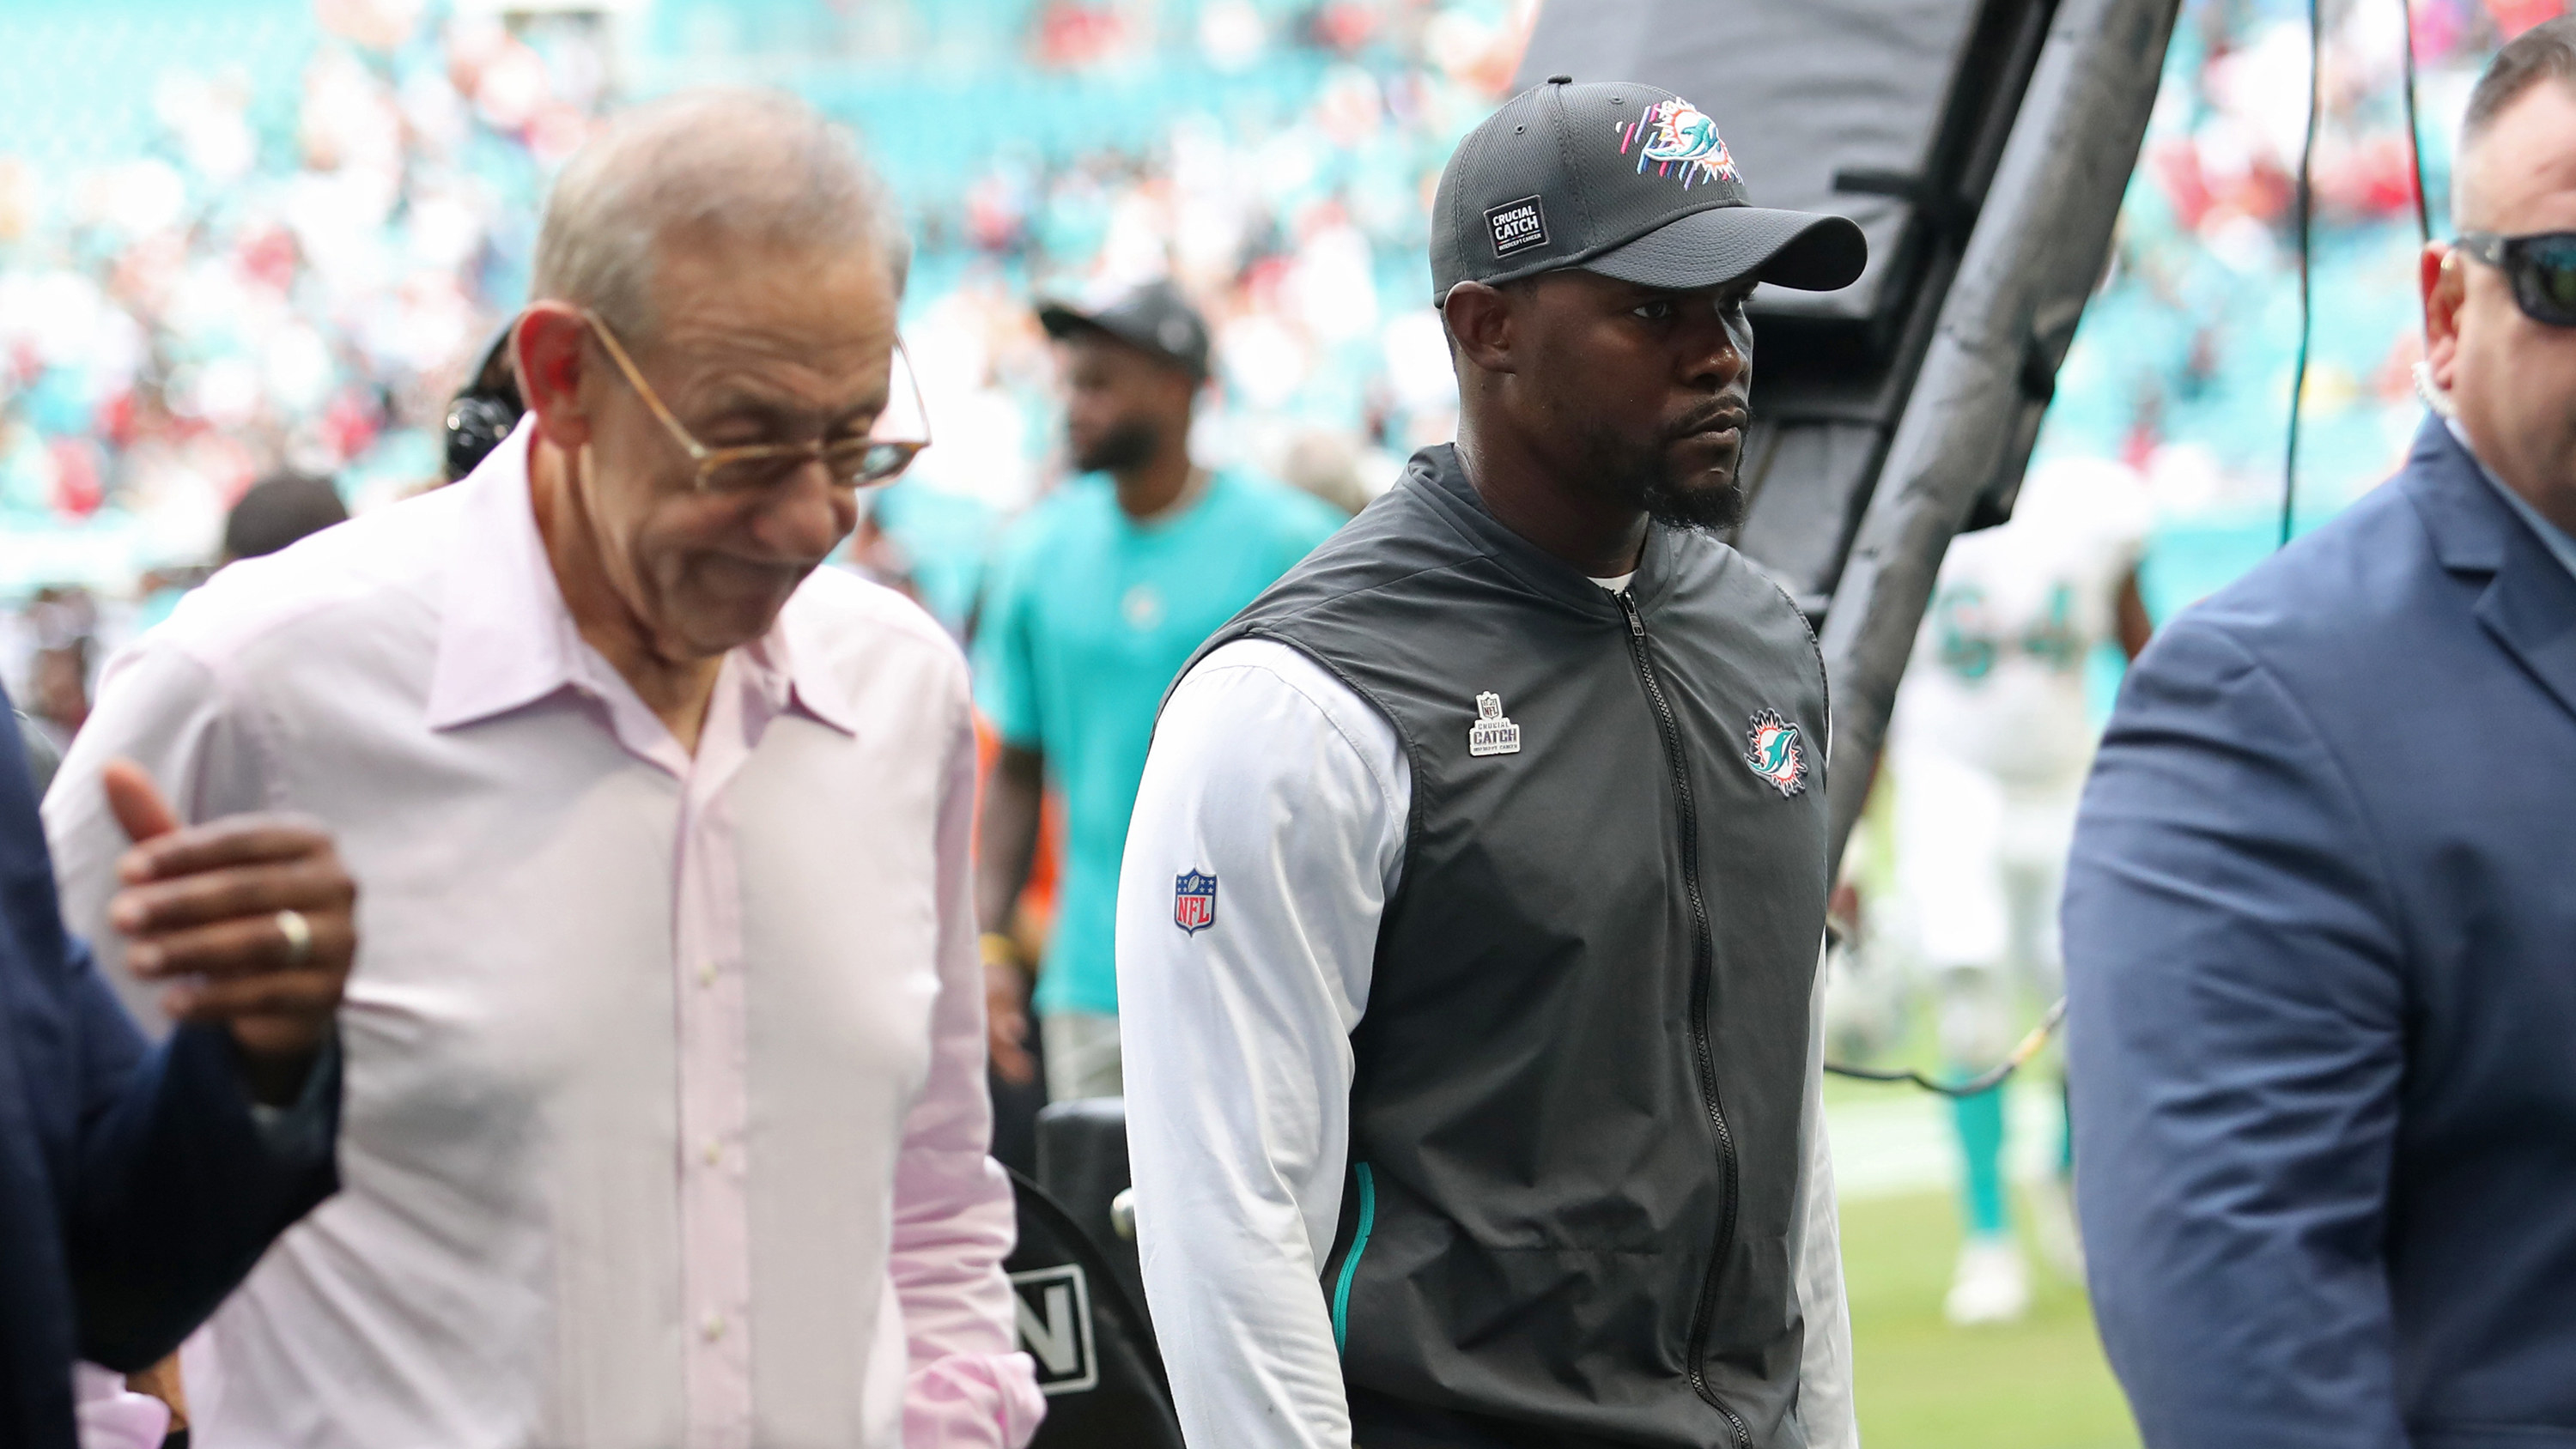 Owner of the Dolphins Stephen Ross and Brian Flores walking off the field together